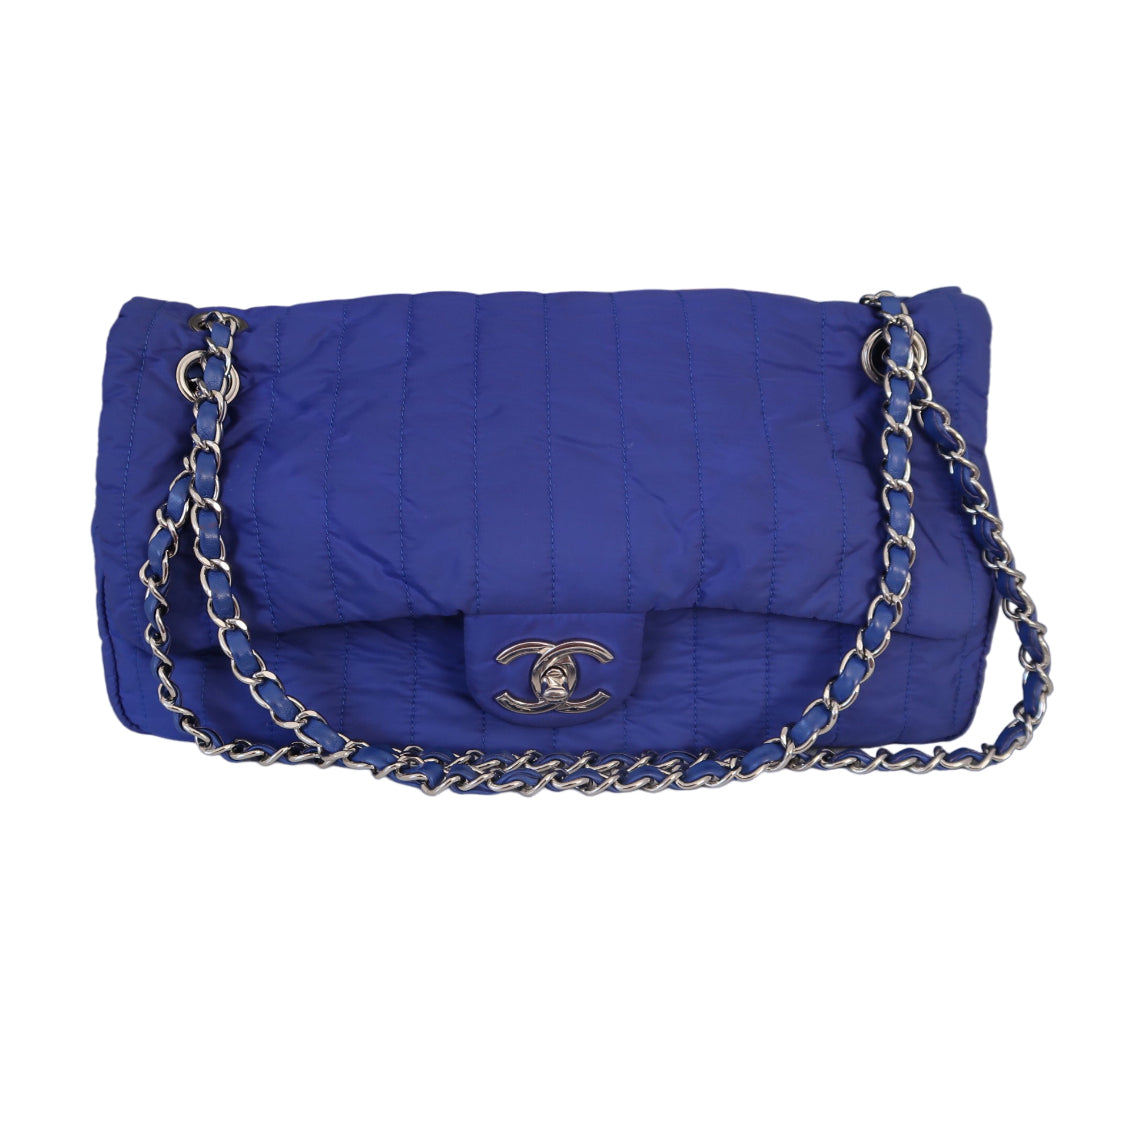 Chanel Cobalt Blue Nylon Vertical Quilted Jumbo Flap Purse